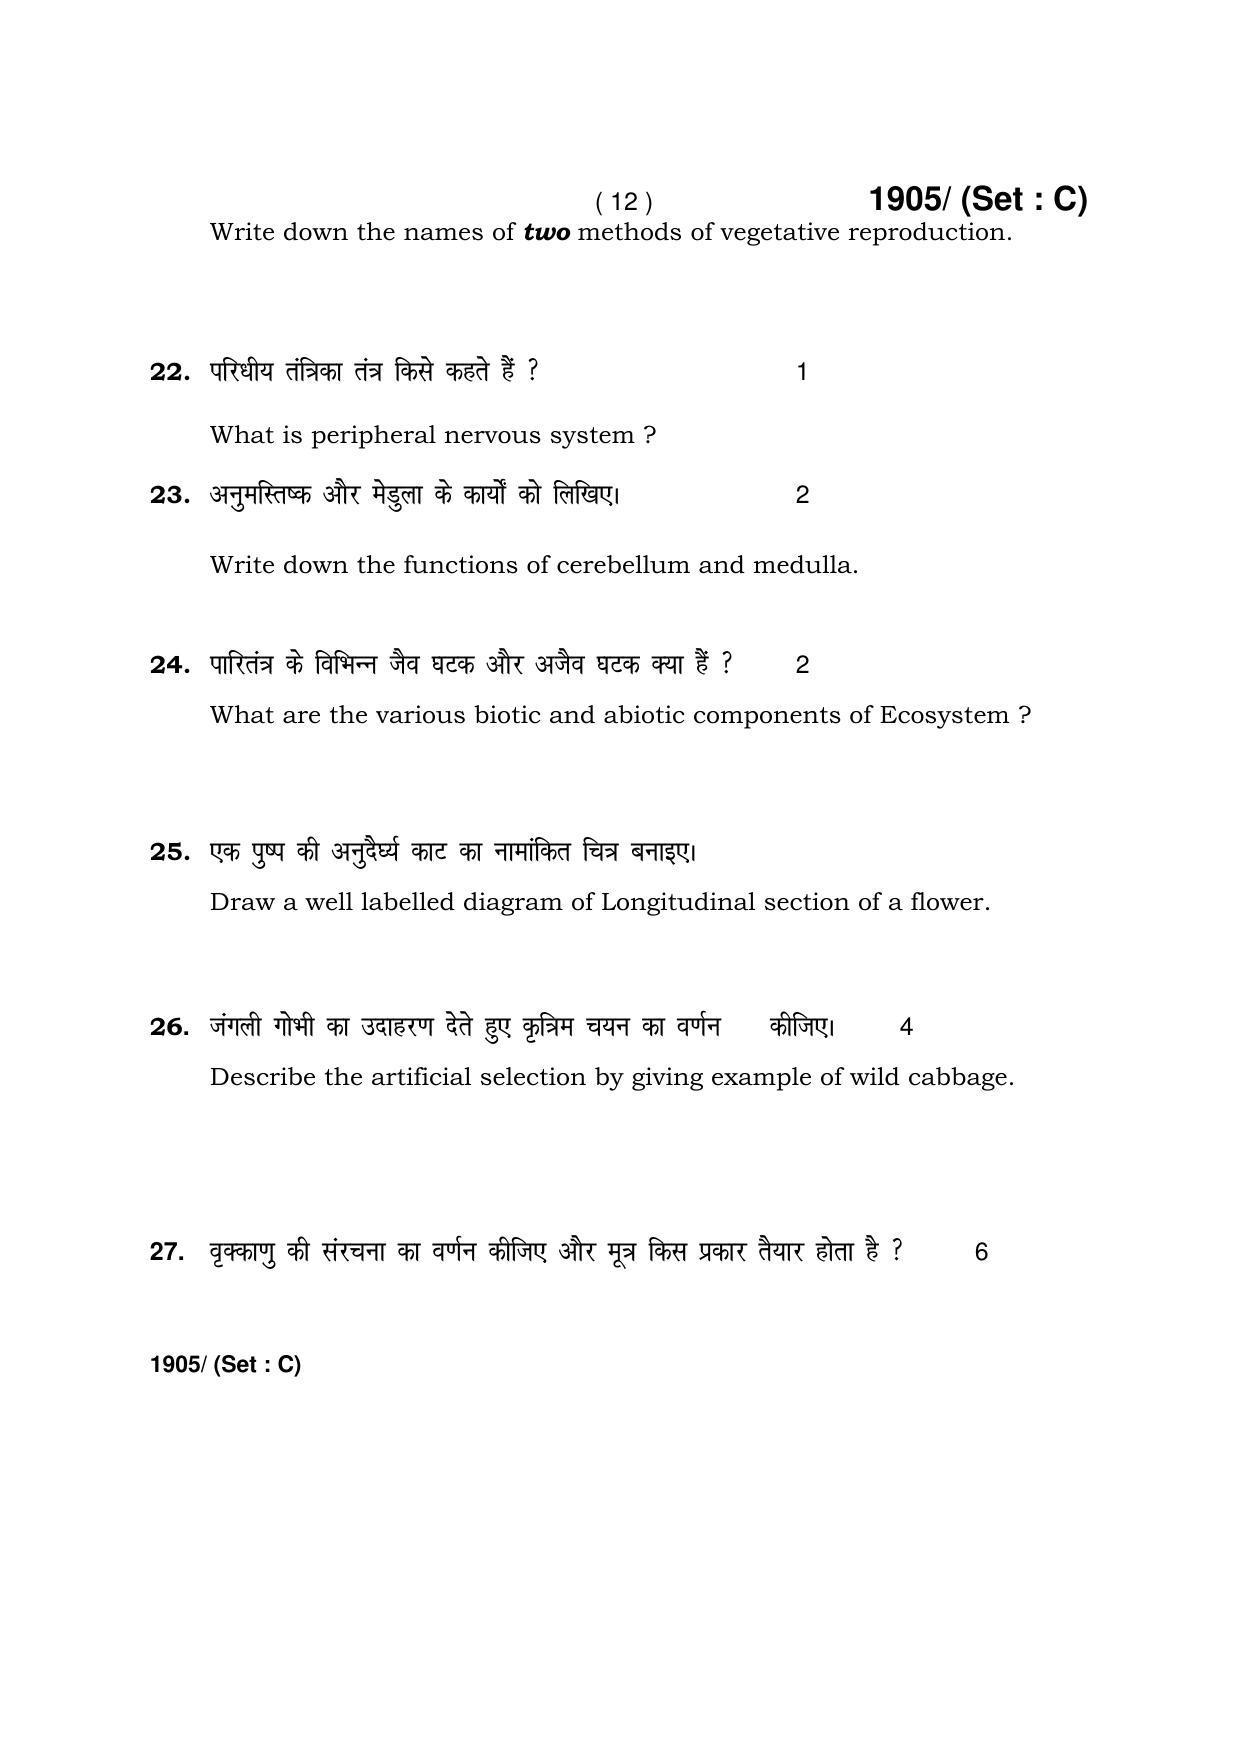 Haryana Board HBSE Class 10 Science -C 2017 Question Paper - Page 12